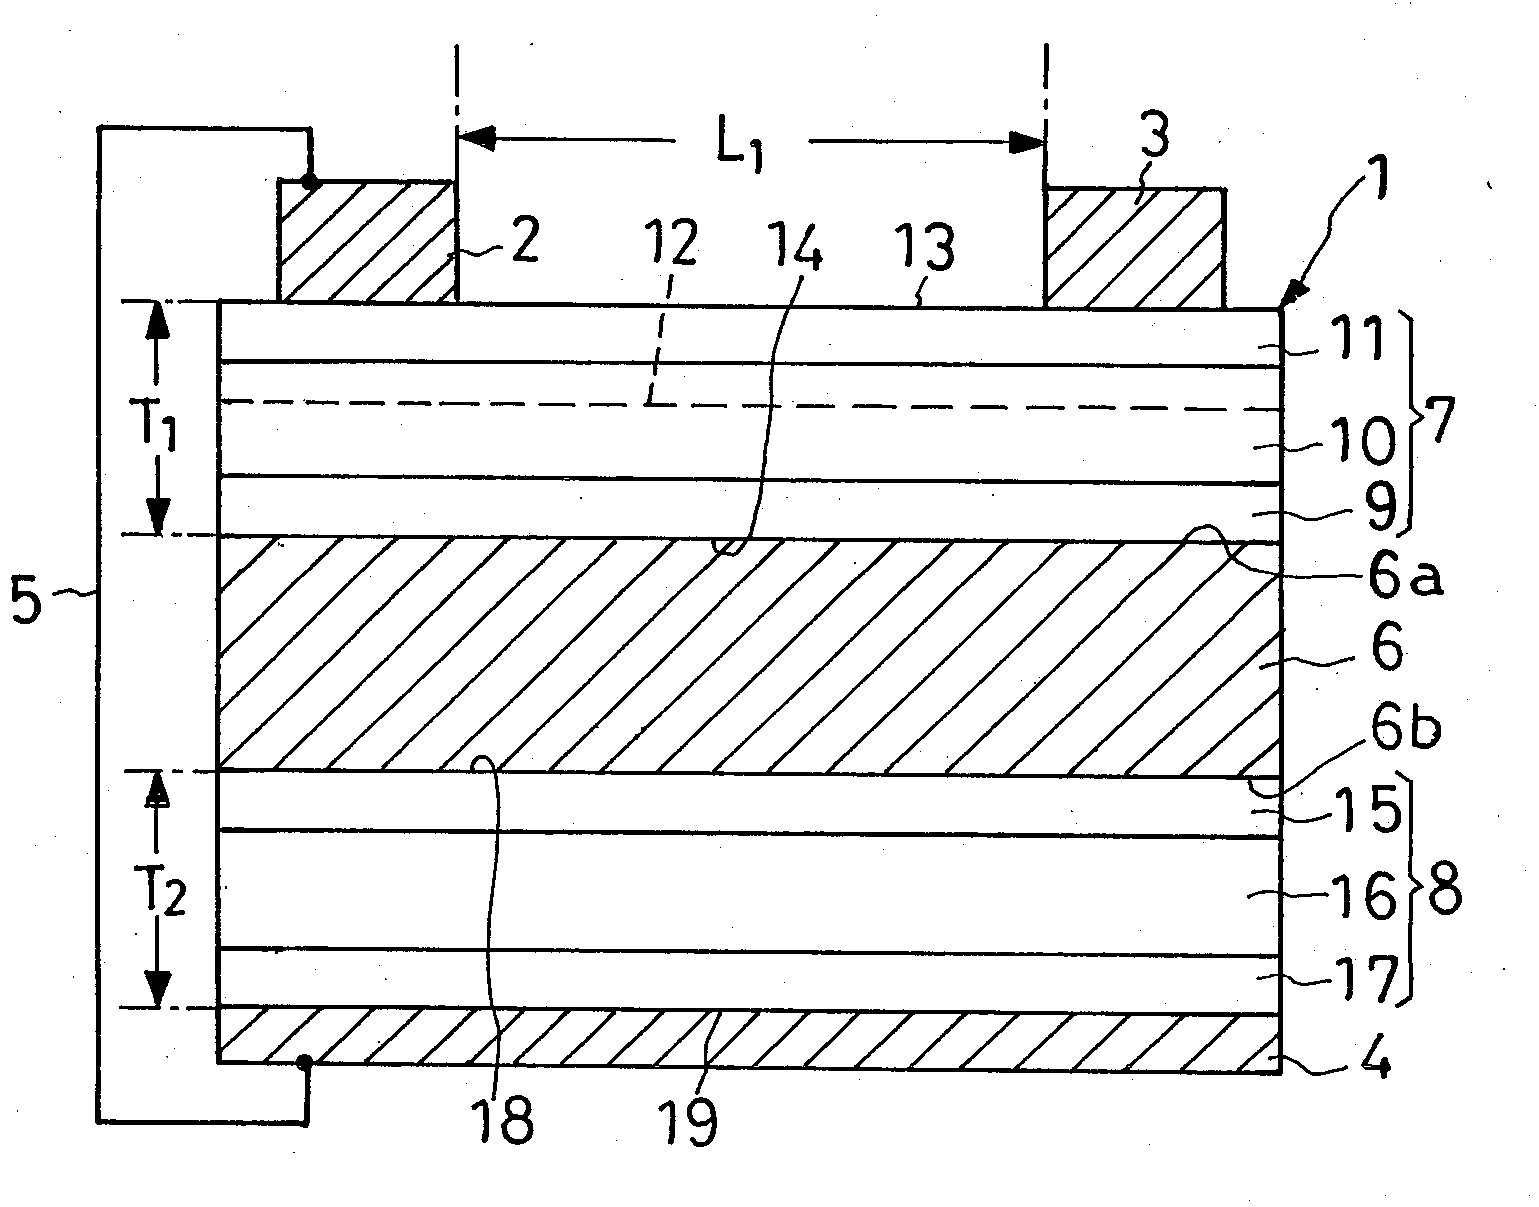 Warp-free semiconductor wafer, and devices using the same